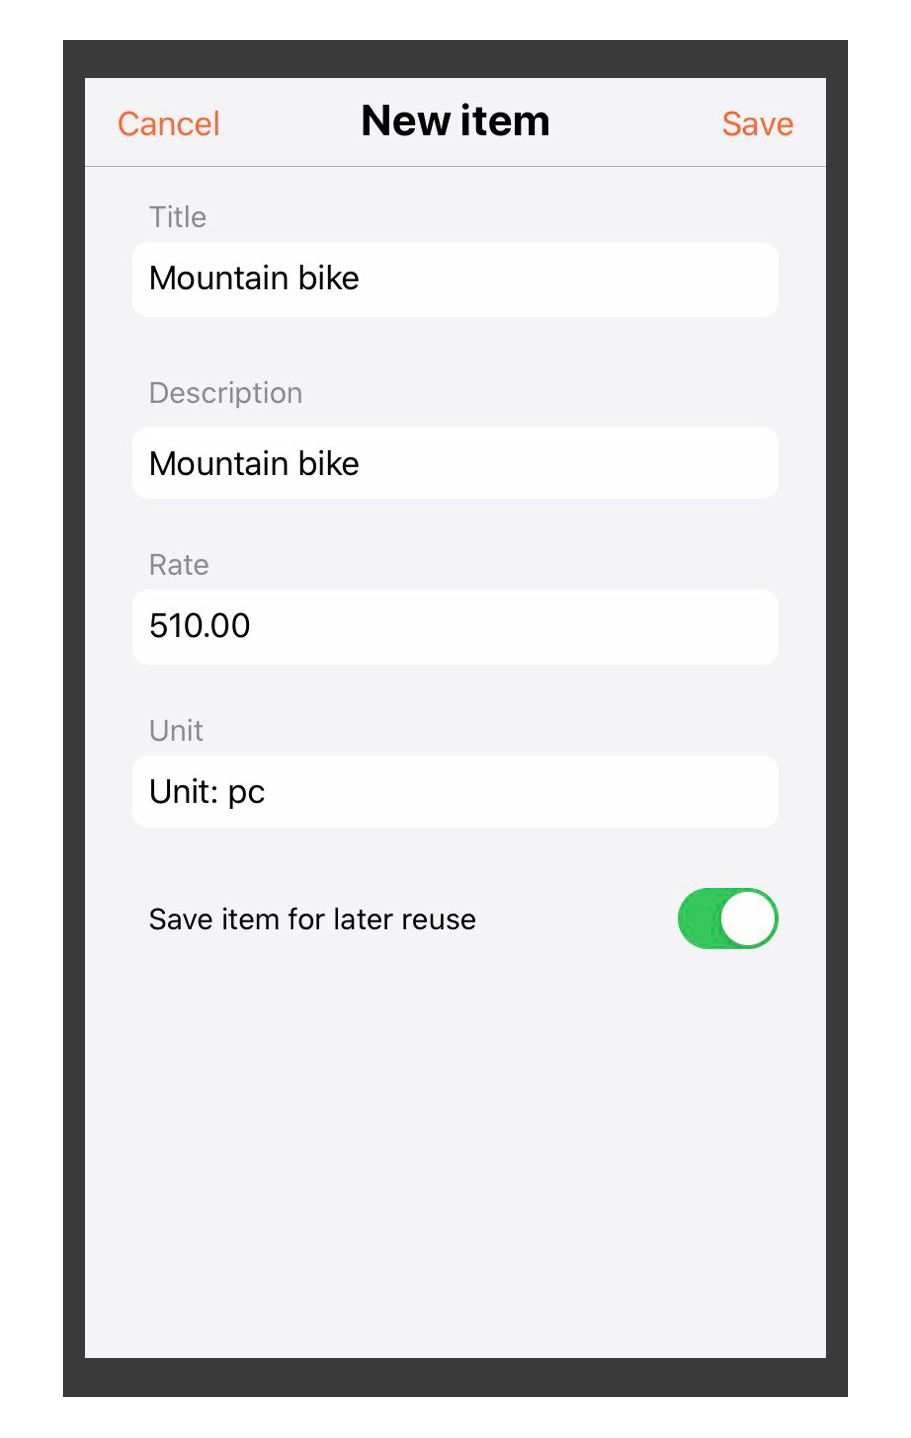 How To Write an Invoice with the invoicely Mobile App